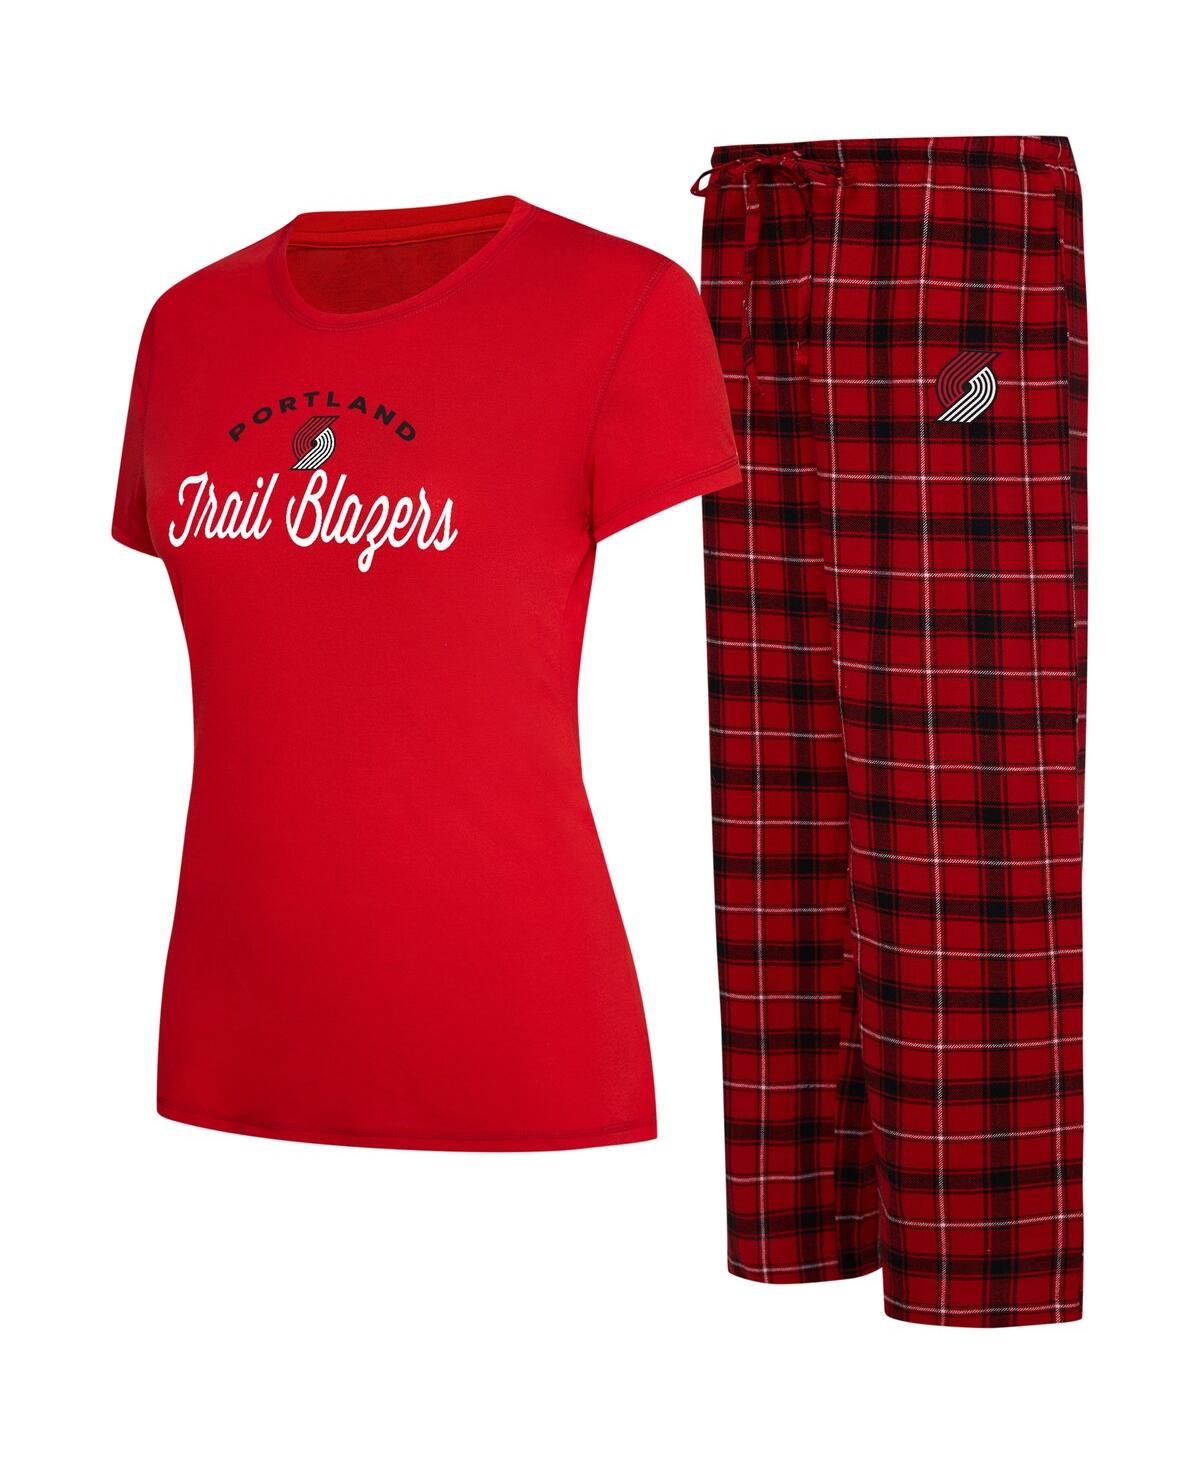 Women's College Concepts Red, Black Portland Trail Blazers Arctic T-shirt and Flannel Pants Sleep Set - Red, Black